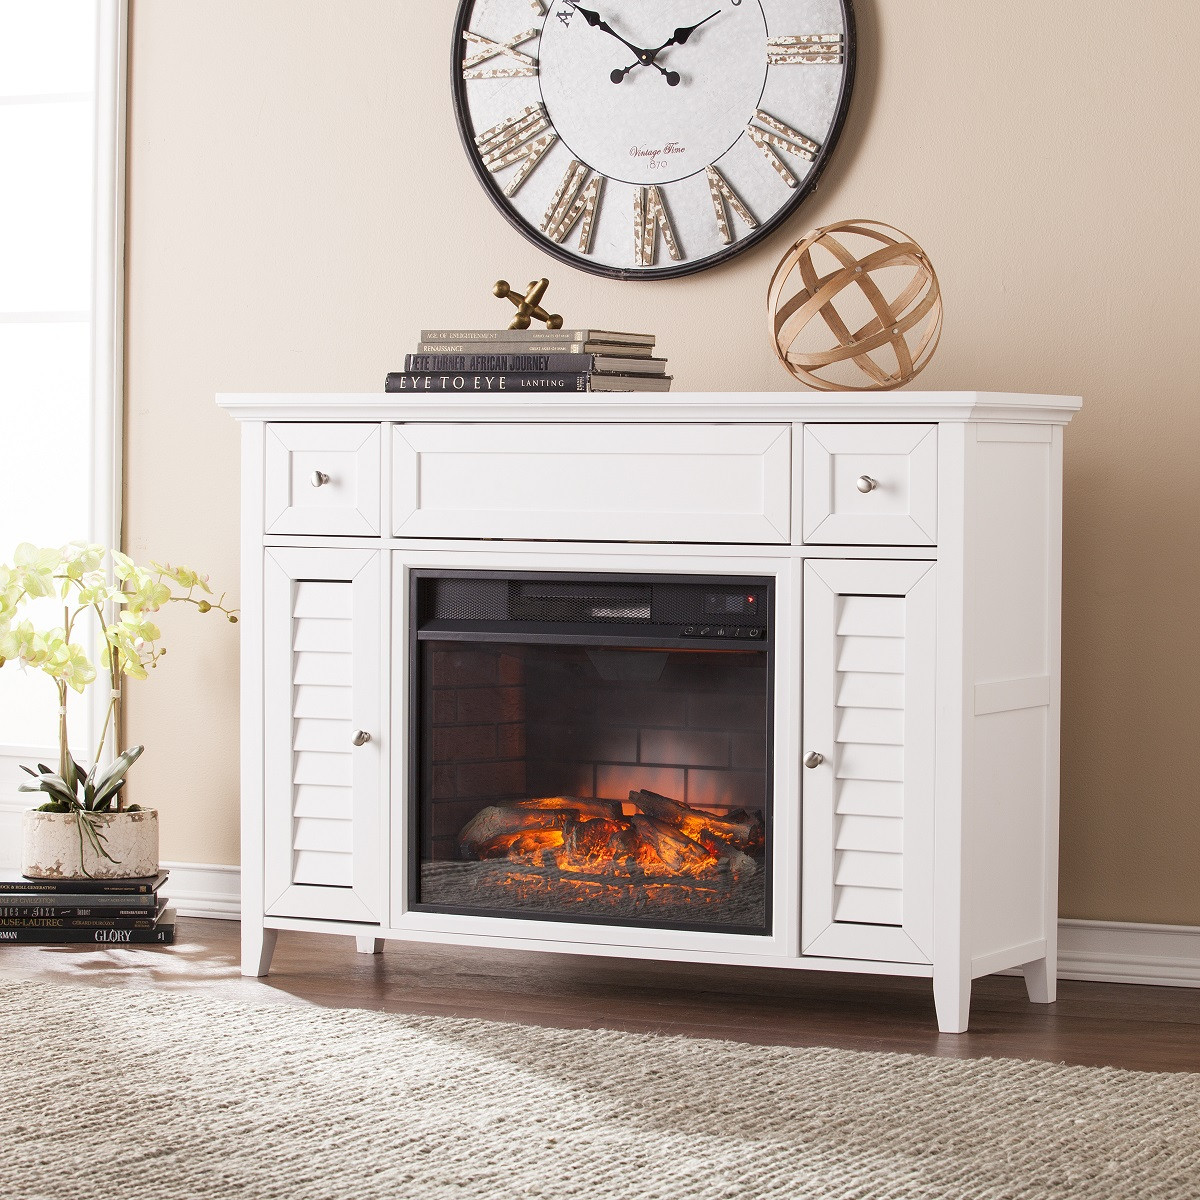 48 Inch Electric Fireplace
 48" Fairbury 3 in 1 Infrared Media Fireplace Console White